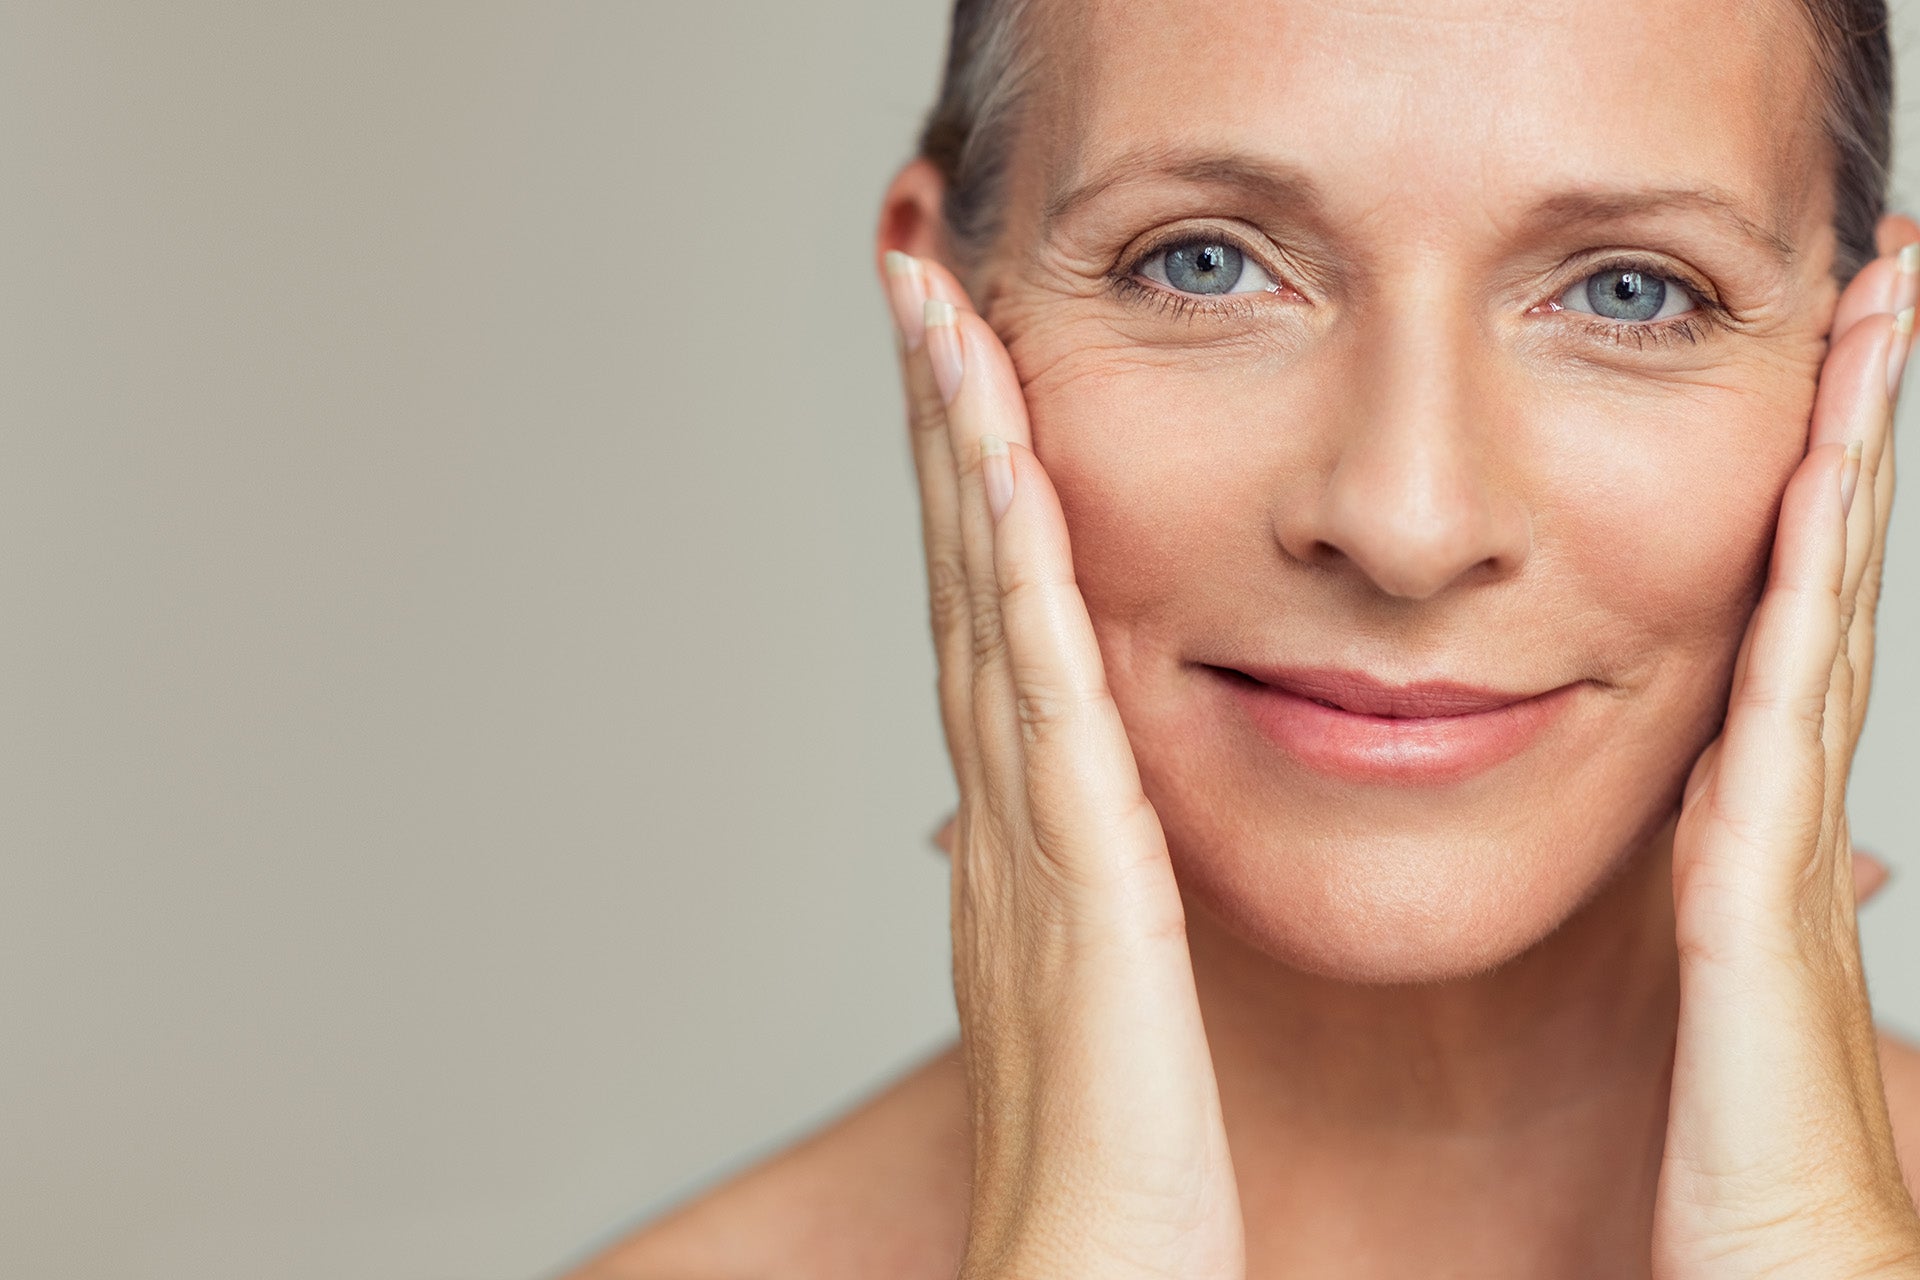 How To Slow the Aging Process